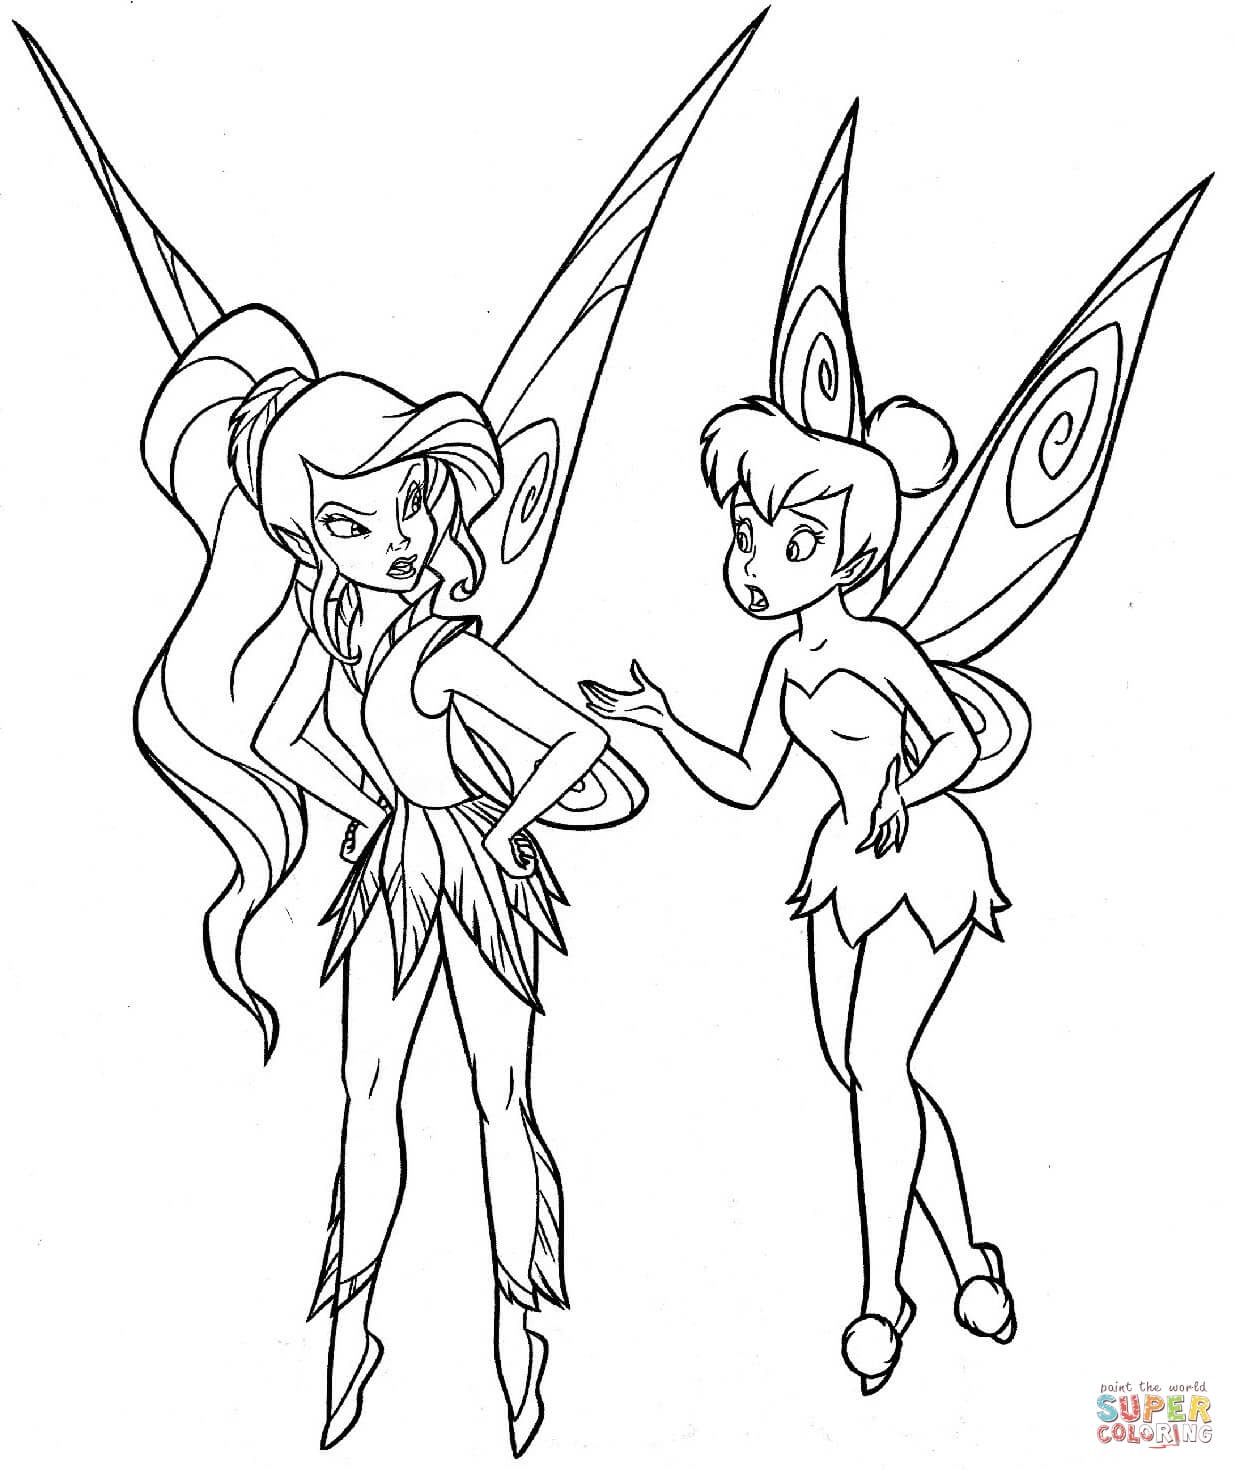 Two Fairies Coloring Page | Free Printable Coloring Pages - Free Printable Fairy Coloring Pictures